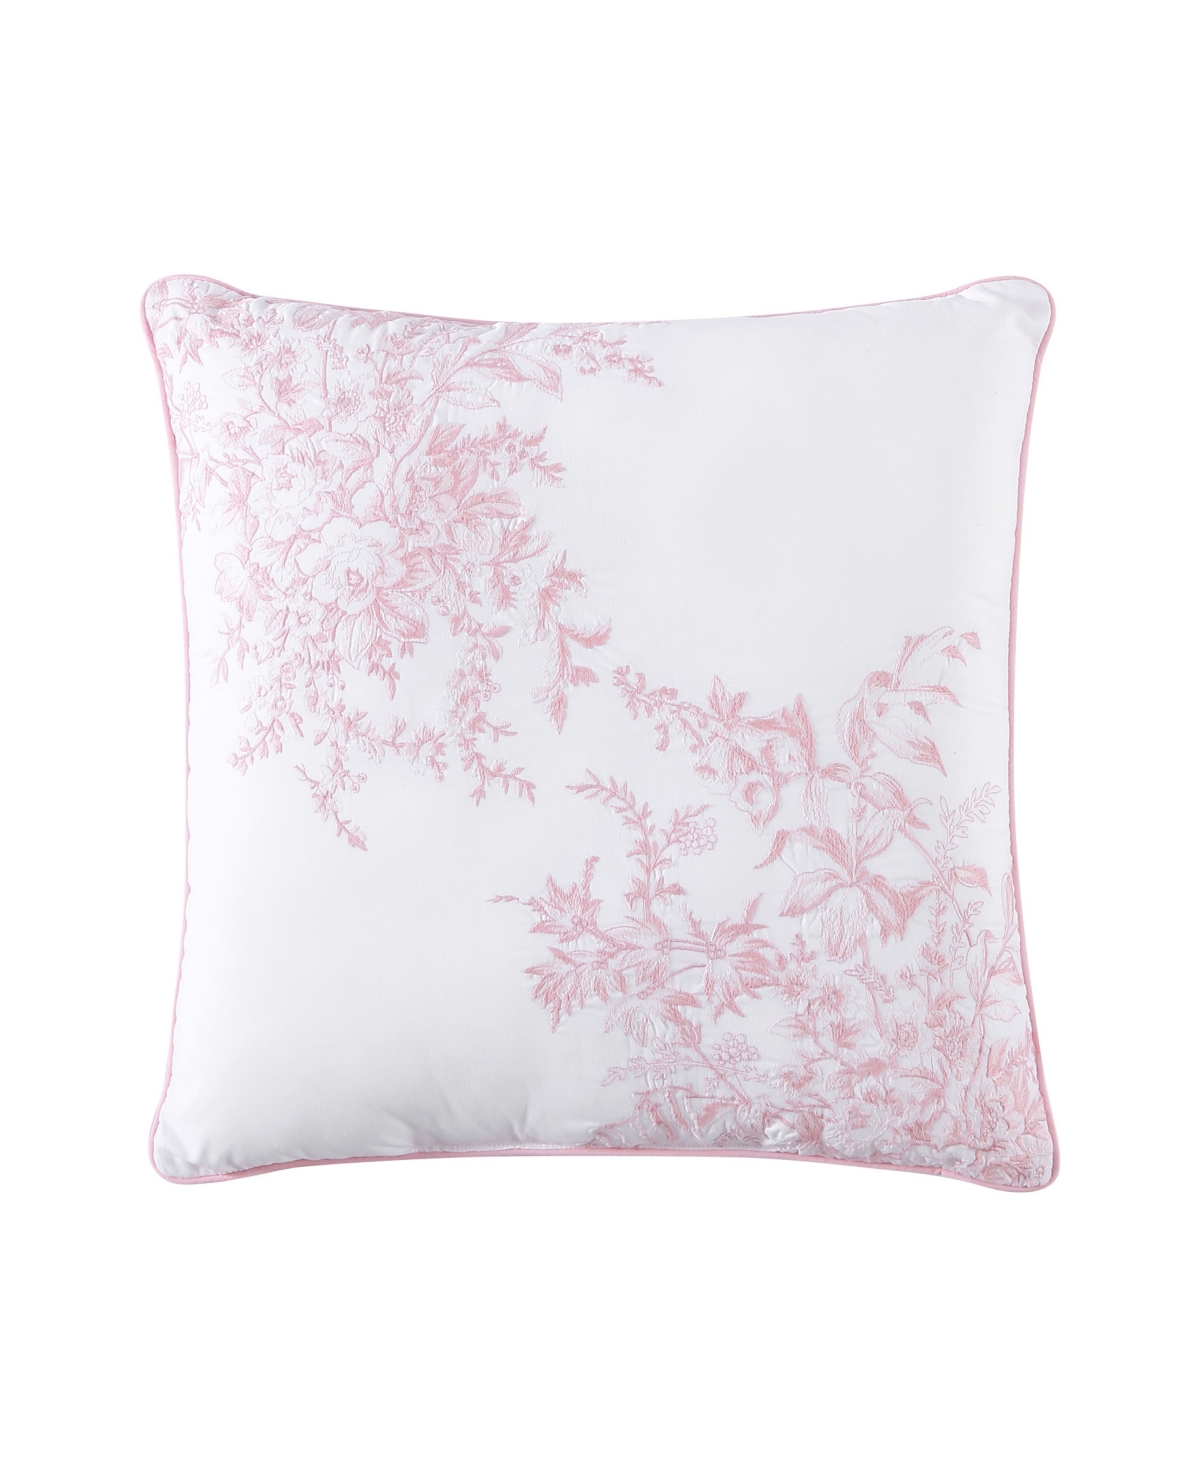 Laura Ashley Bedford Embroidered Decorative Pillow, 20" X 20" In Pale Pink